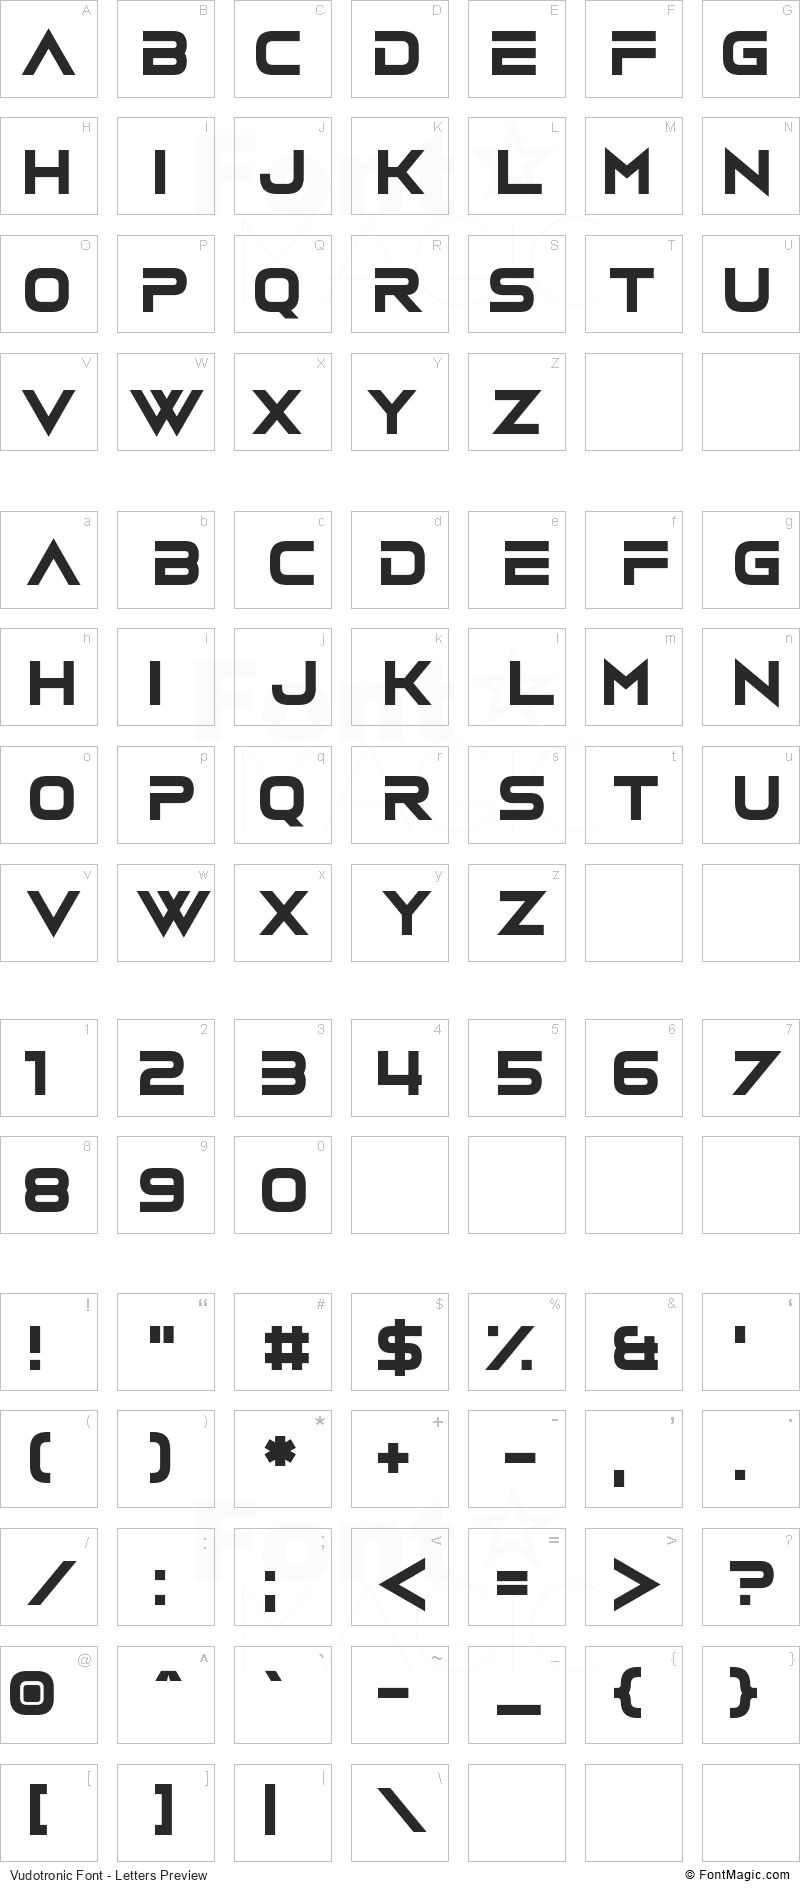 Vudotronic Font - All Latters Preview Chart